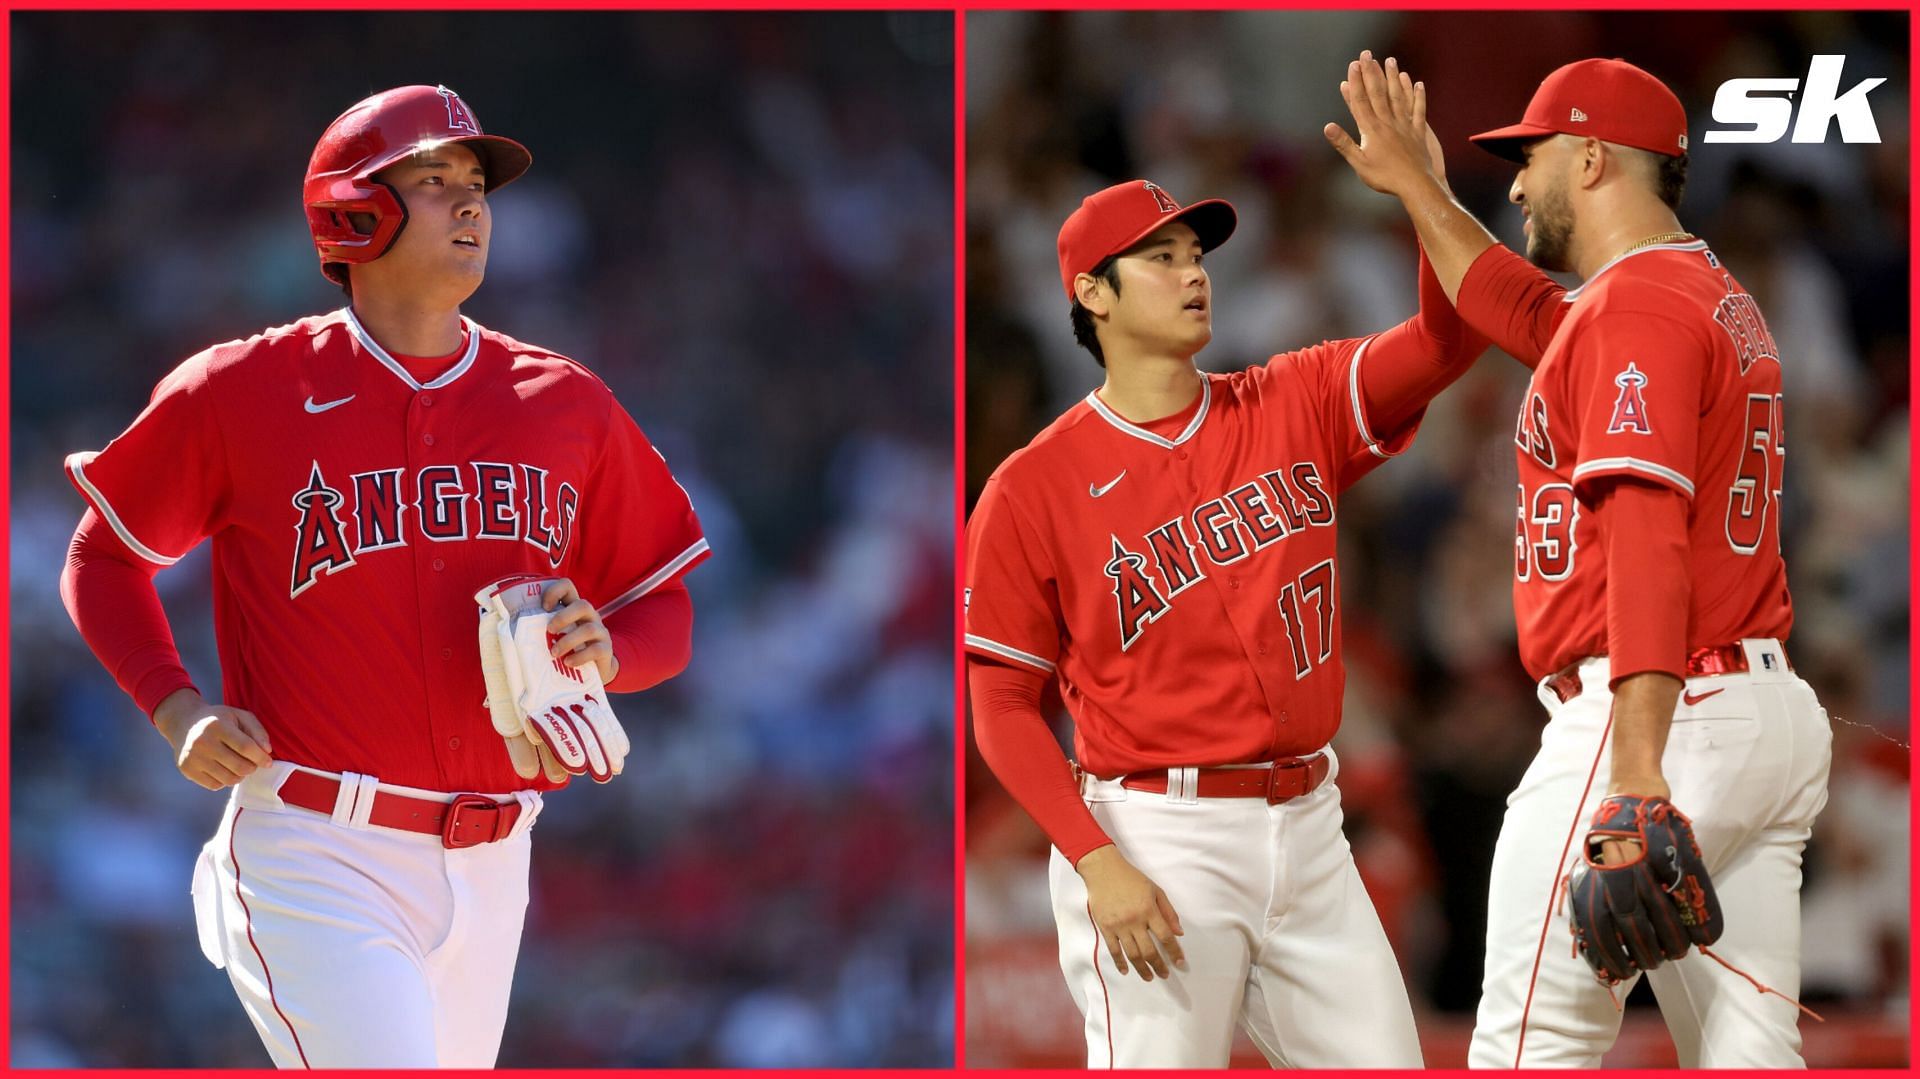 Shohei Ohtani attracting interests from MLB teams ahead of trade deadline